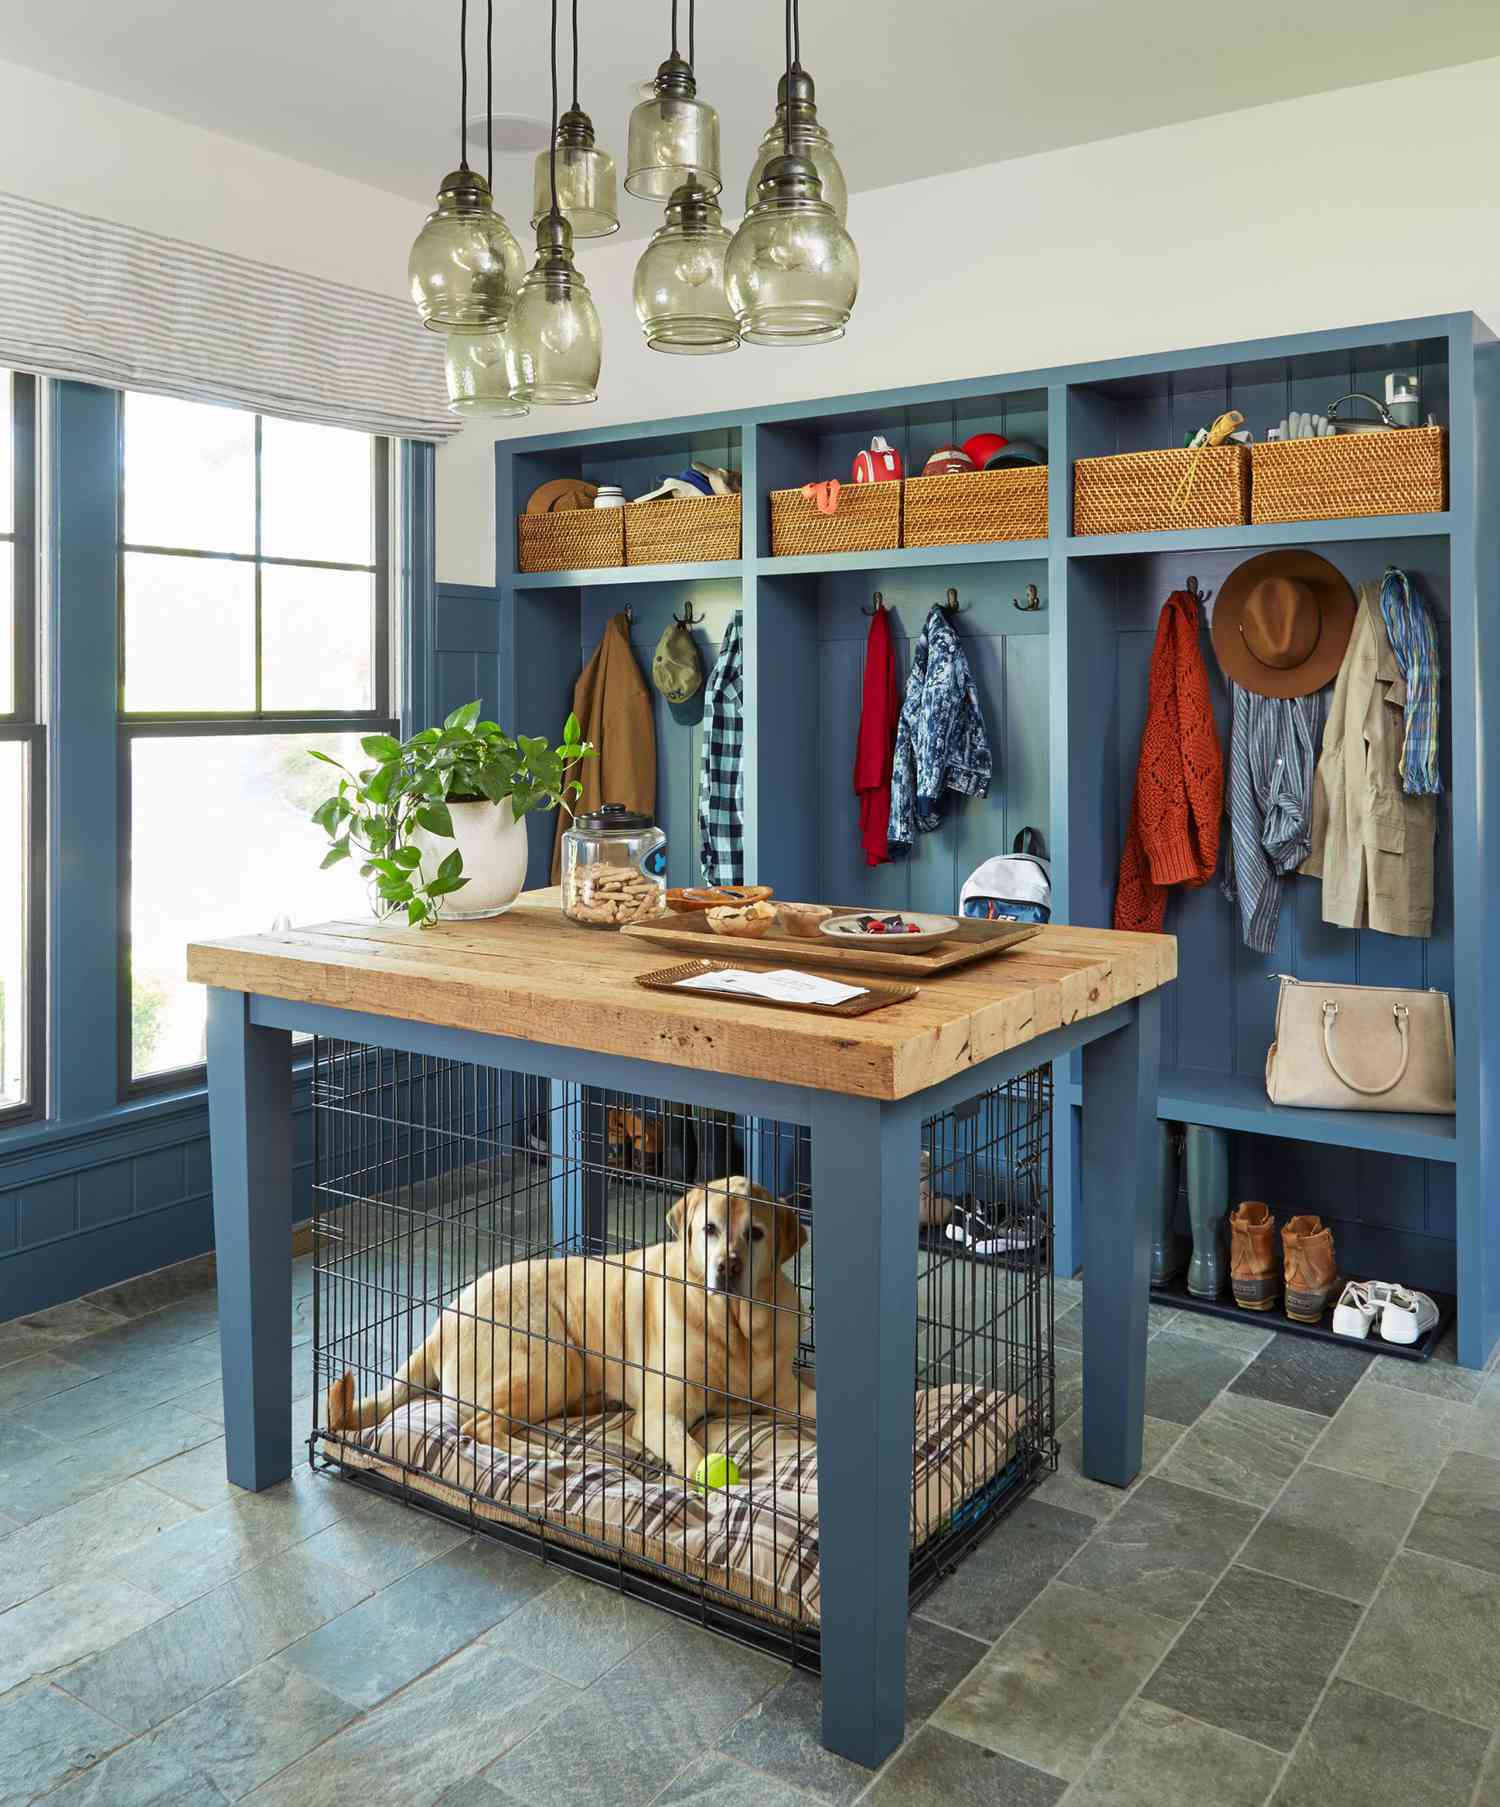 10 Dog Crate Ideas That Actually Look Good in Your Home | Daily Paws